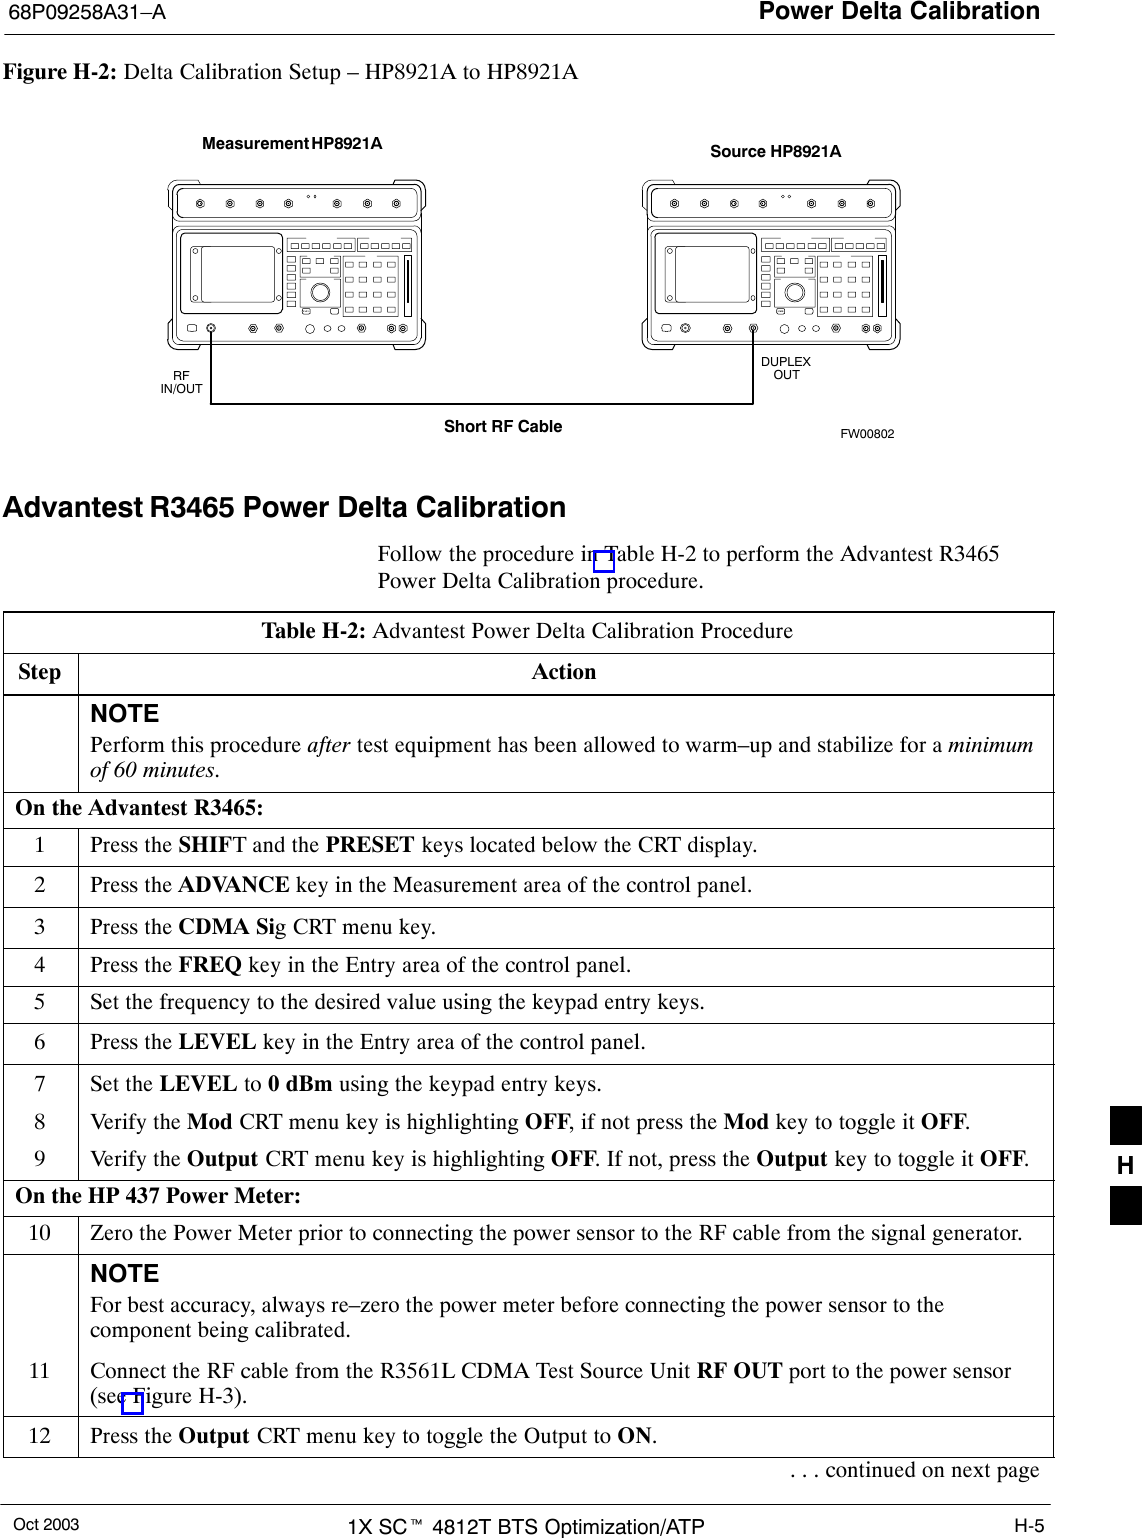 Power Delta Calibration68P09258A31–AOct 2003 1X SCt 4812T BTS Optimization/ATP H-5Figure H-2: Delta Calibration Setup – HP8921A to HP8921AMeasurement HP8921A Source HP8921AShort RF CableDUPLEXOUTRFIN/OUTFW00802Advantest R3465 Power Delta CalibrationFollow the procedure in Table H-2 to perform the Advantest R3465Power Delta Calibration procedure.Table H-2: Advantest Power Delta Calibration ProcedureStep ActionNOTEPerform this procedure after test equipment has been allowed to warm–up and stabilize for a minimumof 60 minutes.On the Advantest R3465:1Press the SHIFT and the PRESET keys located below the CRT display.2Press the ADVANCE key in the Measurement area of the control panel.3Press the CDMA Sig CRT menu key.4Press the FREQ key in the Entry area of the control panel.5Set the frequency to the desired value using the keypad entry keys.6Press the LEVEL key in the Entry area of the control panel.7Set the LEVEL to 0 dBm using the keypad entry keys.8Verify the Mod CRT menu key is highlighting OFF, if not press the Mod key to toggle it OFF.9Verify the Output CRT menu key is highlighting OFF. If not, press the Output key to toggle it OFF.On the HP 437 Power Meter:10 Zero the Power Meter prior to connecting the power sensor to the RF cable from the signal generator.NOTEFor best accuracy, always re–zero the power meter before connecting the power sensor to thecomponent being calibrated.11 Connect the RF cable from the R3561L CDMA Test Source Unit RF OUT port to the power sensor(see Figure H-3).12 Press the Output CRT menu key to toggle the Output to ON.. . . continued on next pageH